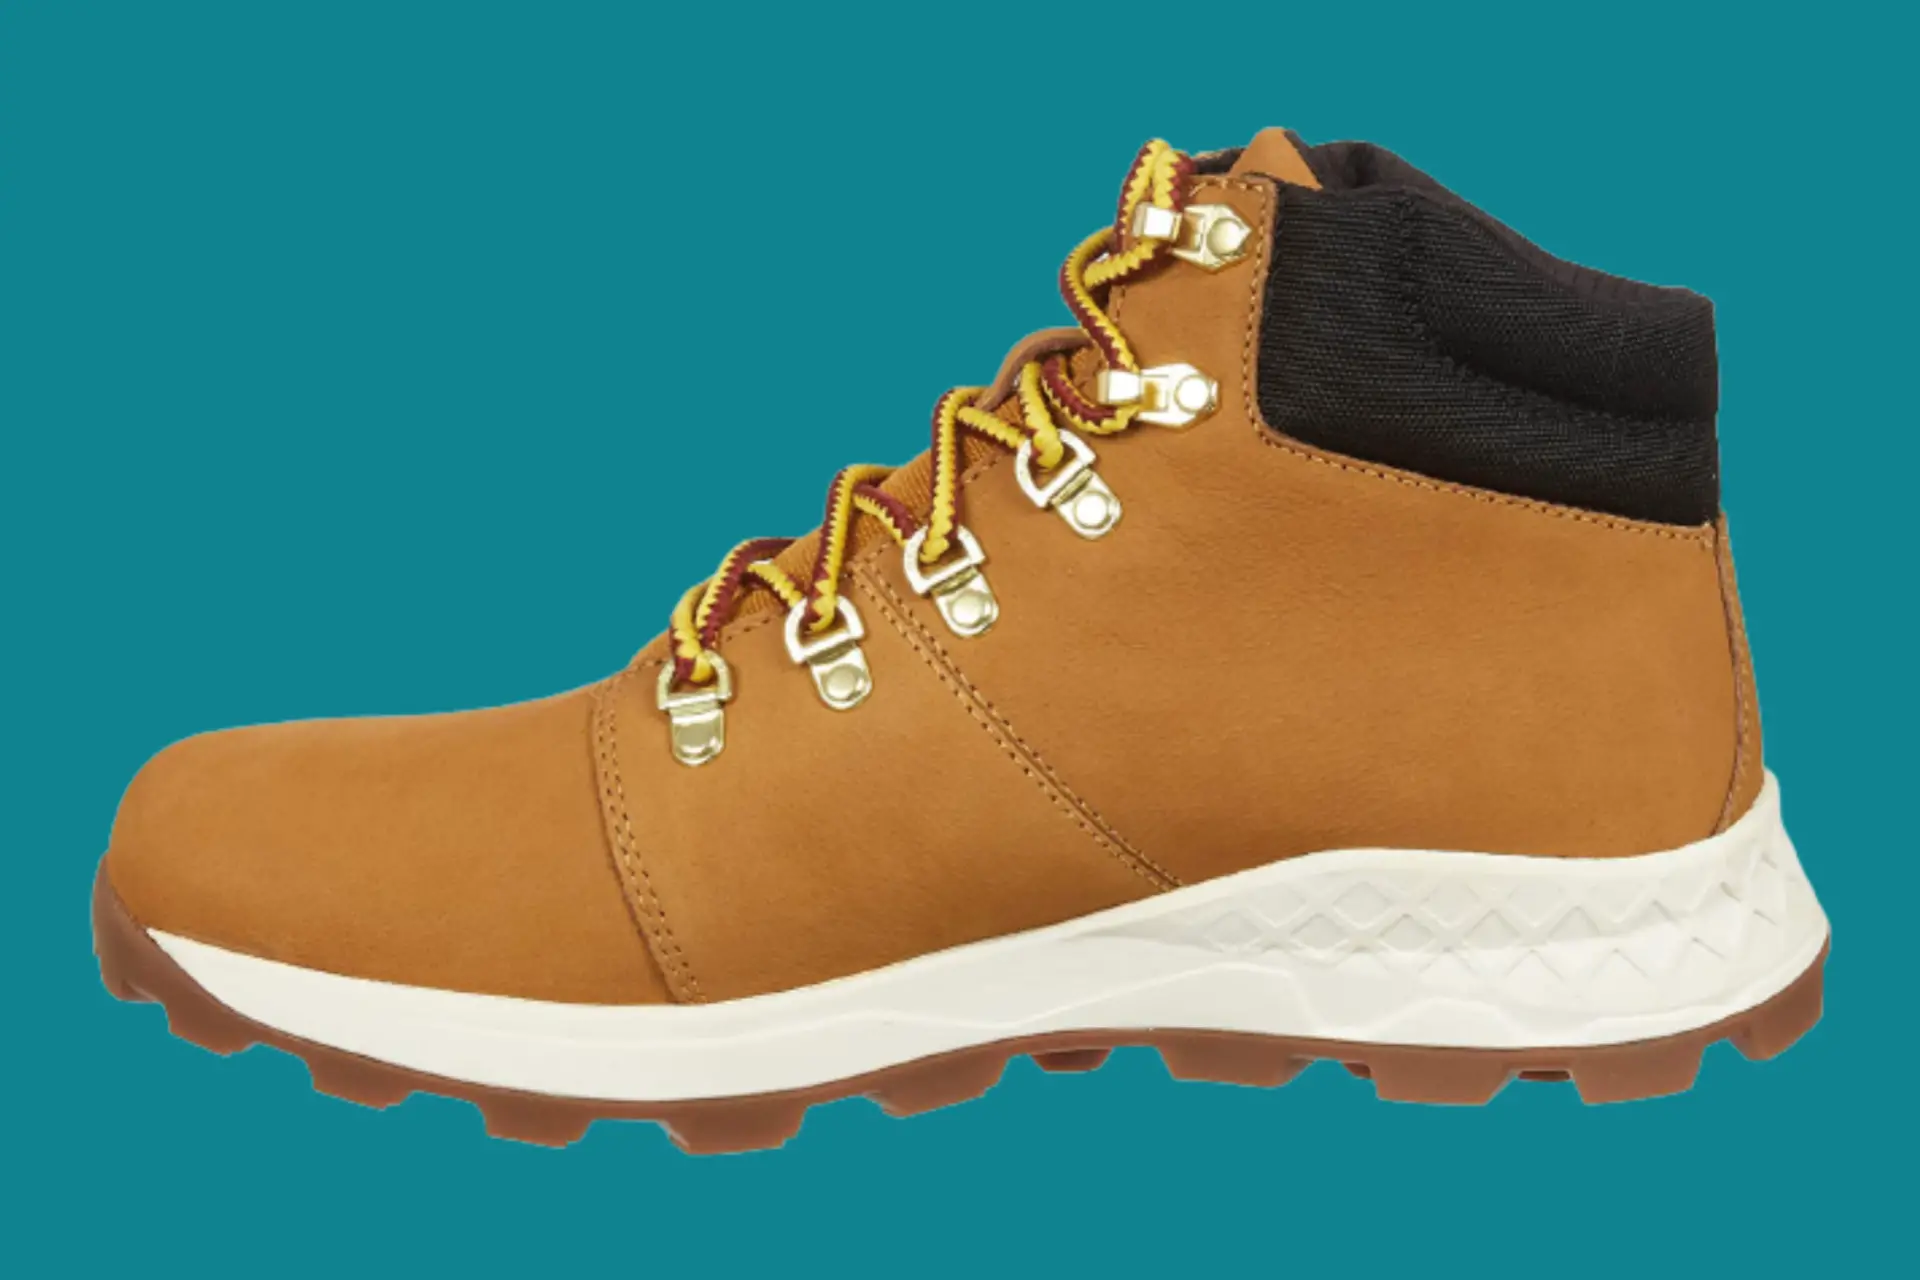 Waterproof hiking boots for hikers